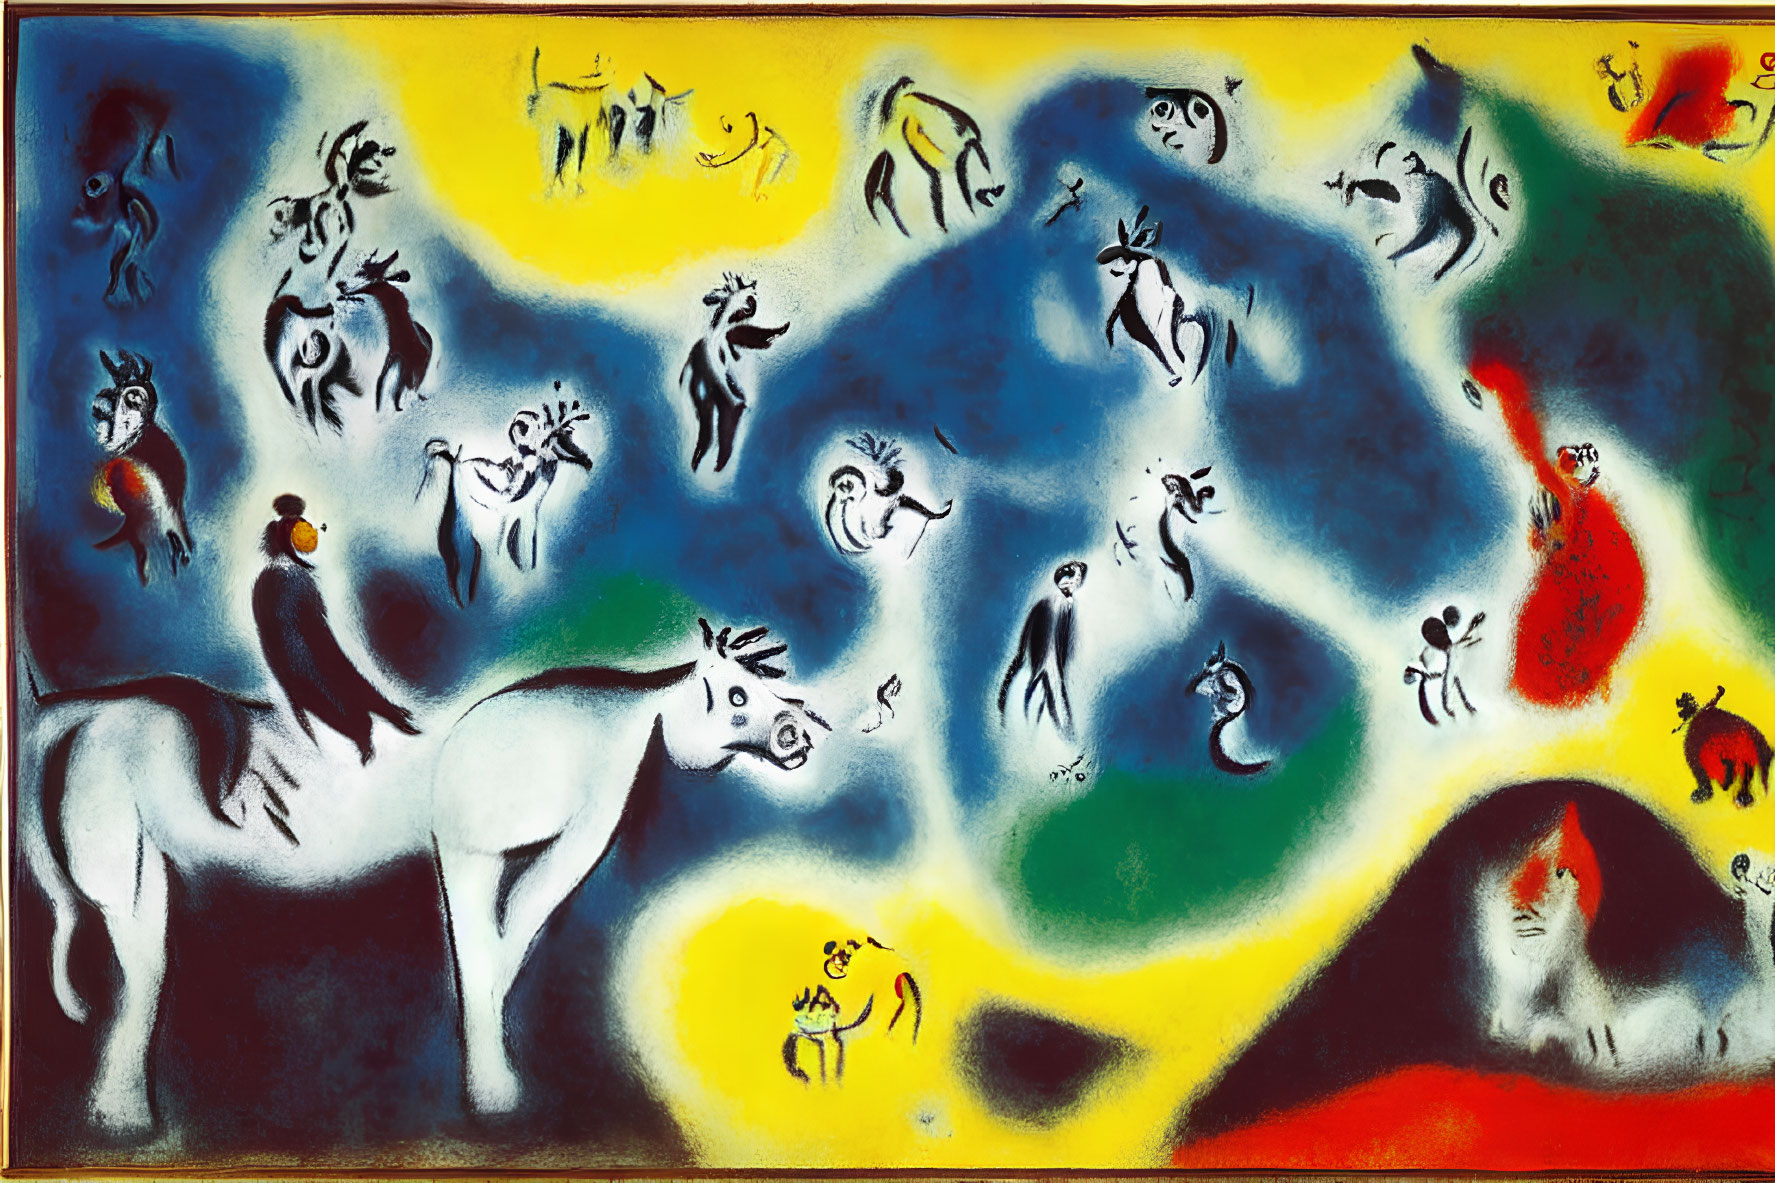 Vibrant Abstract Painting with Human and Animal Figures in Blue, Yellow, and Red